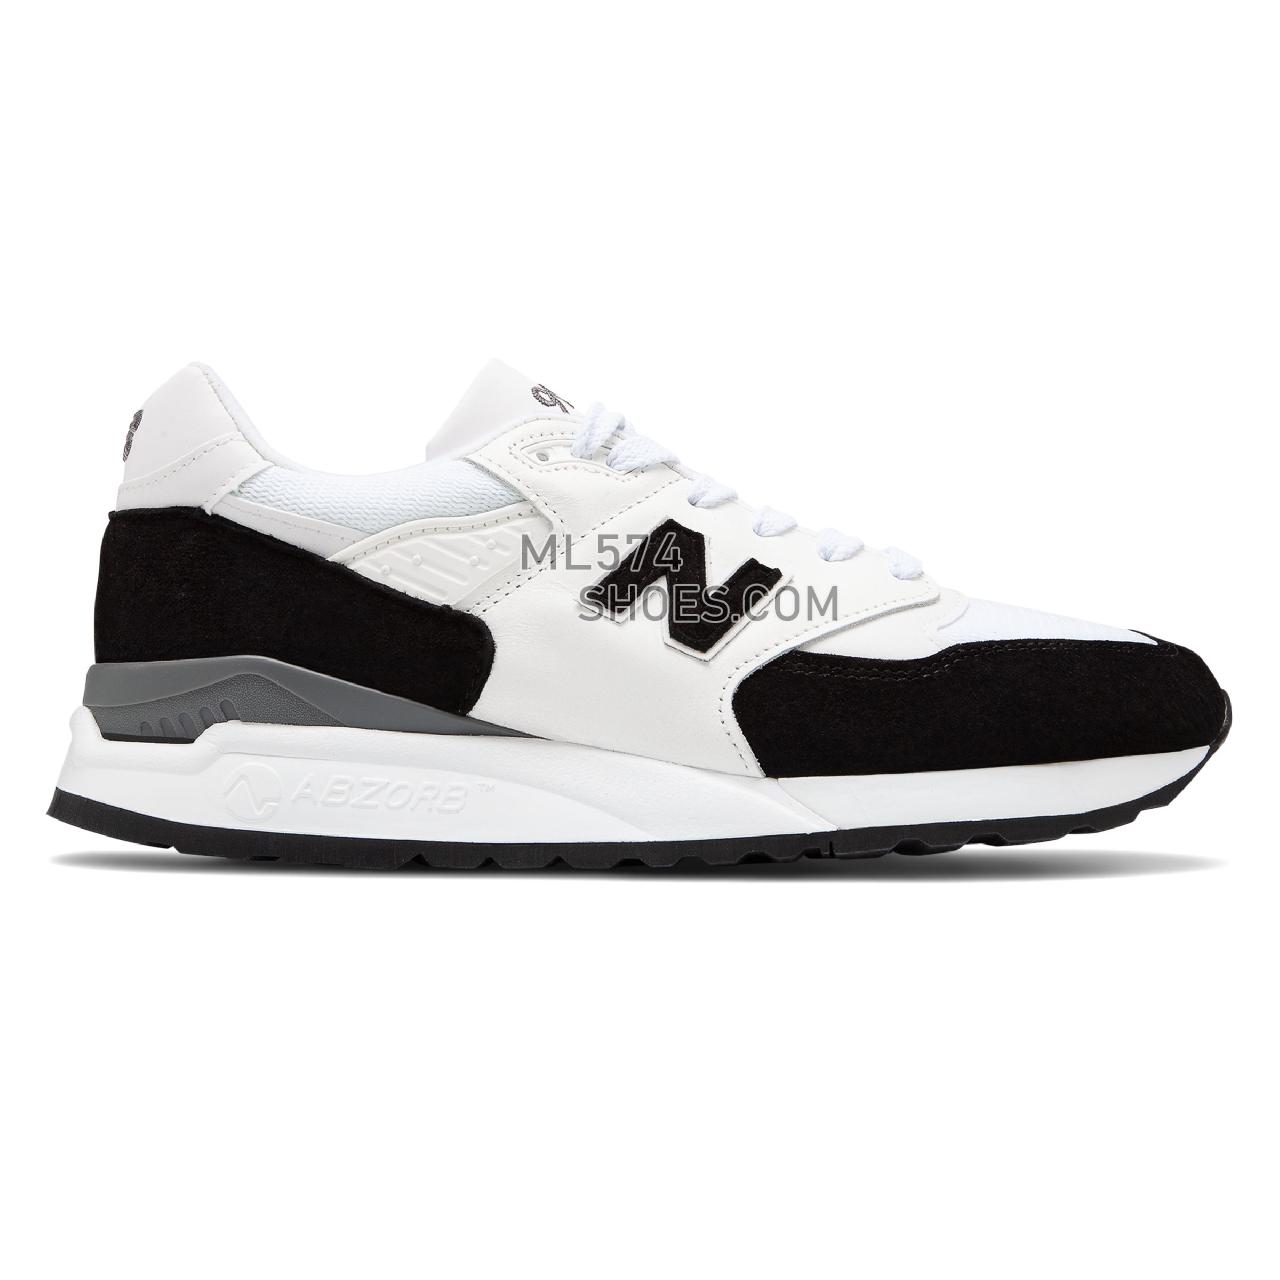 New Balance Made in US 998 - Men's Made in US 998 - Black with White - M998PSC